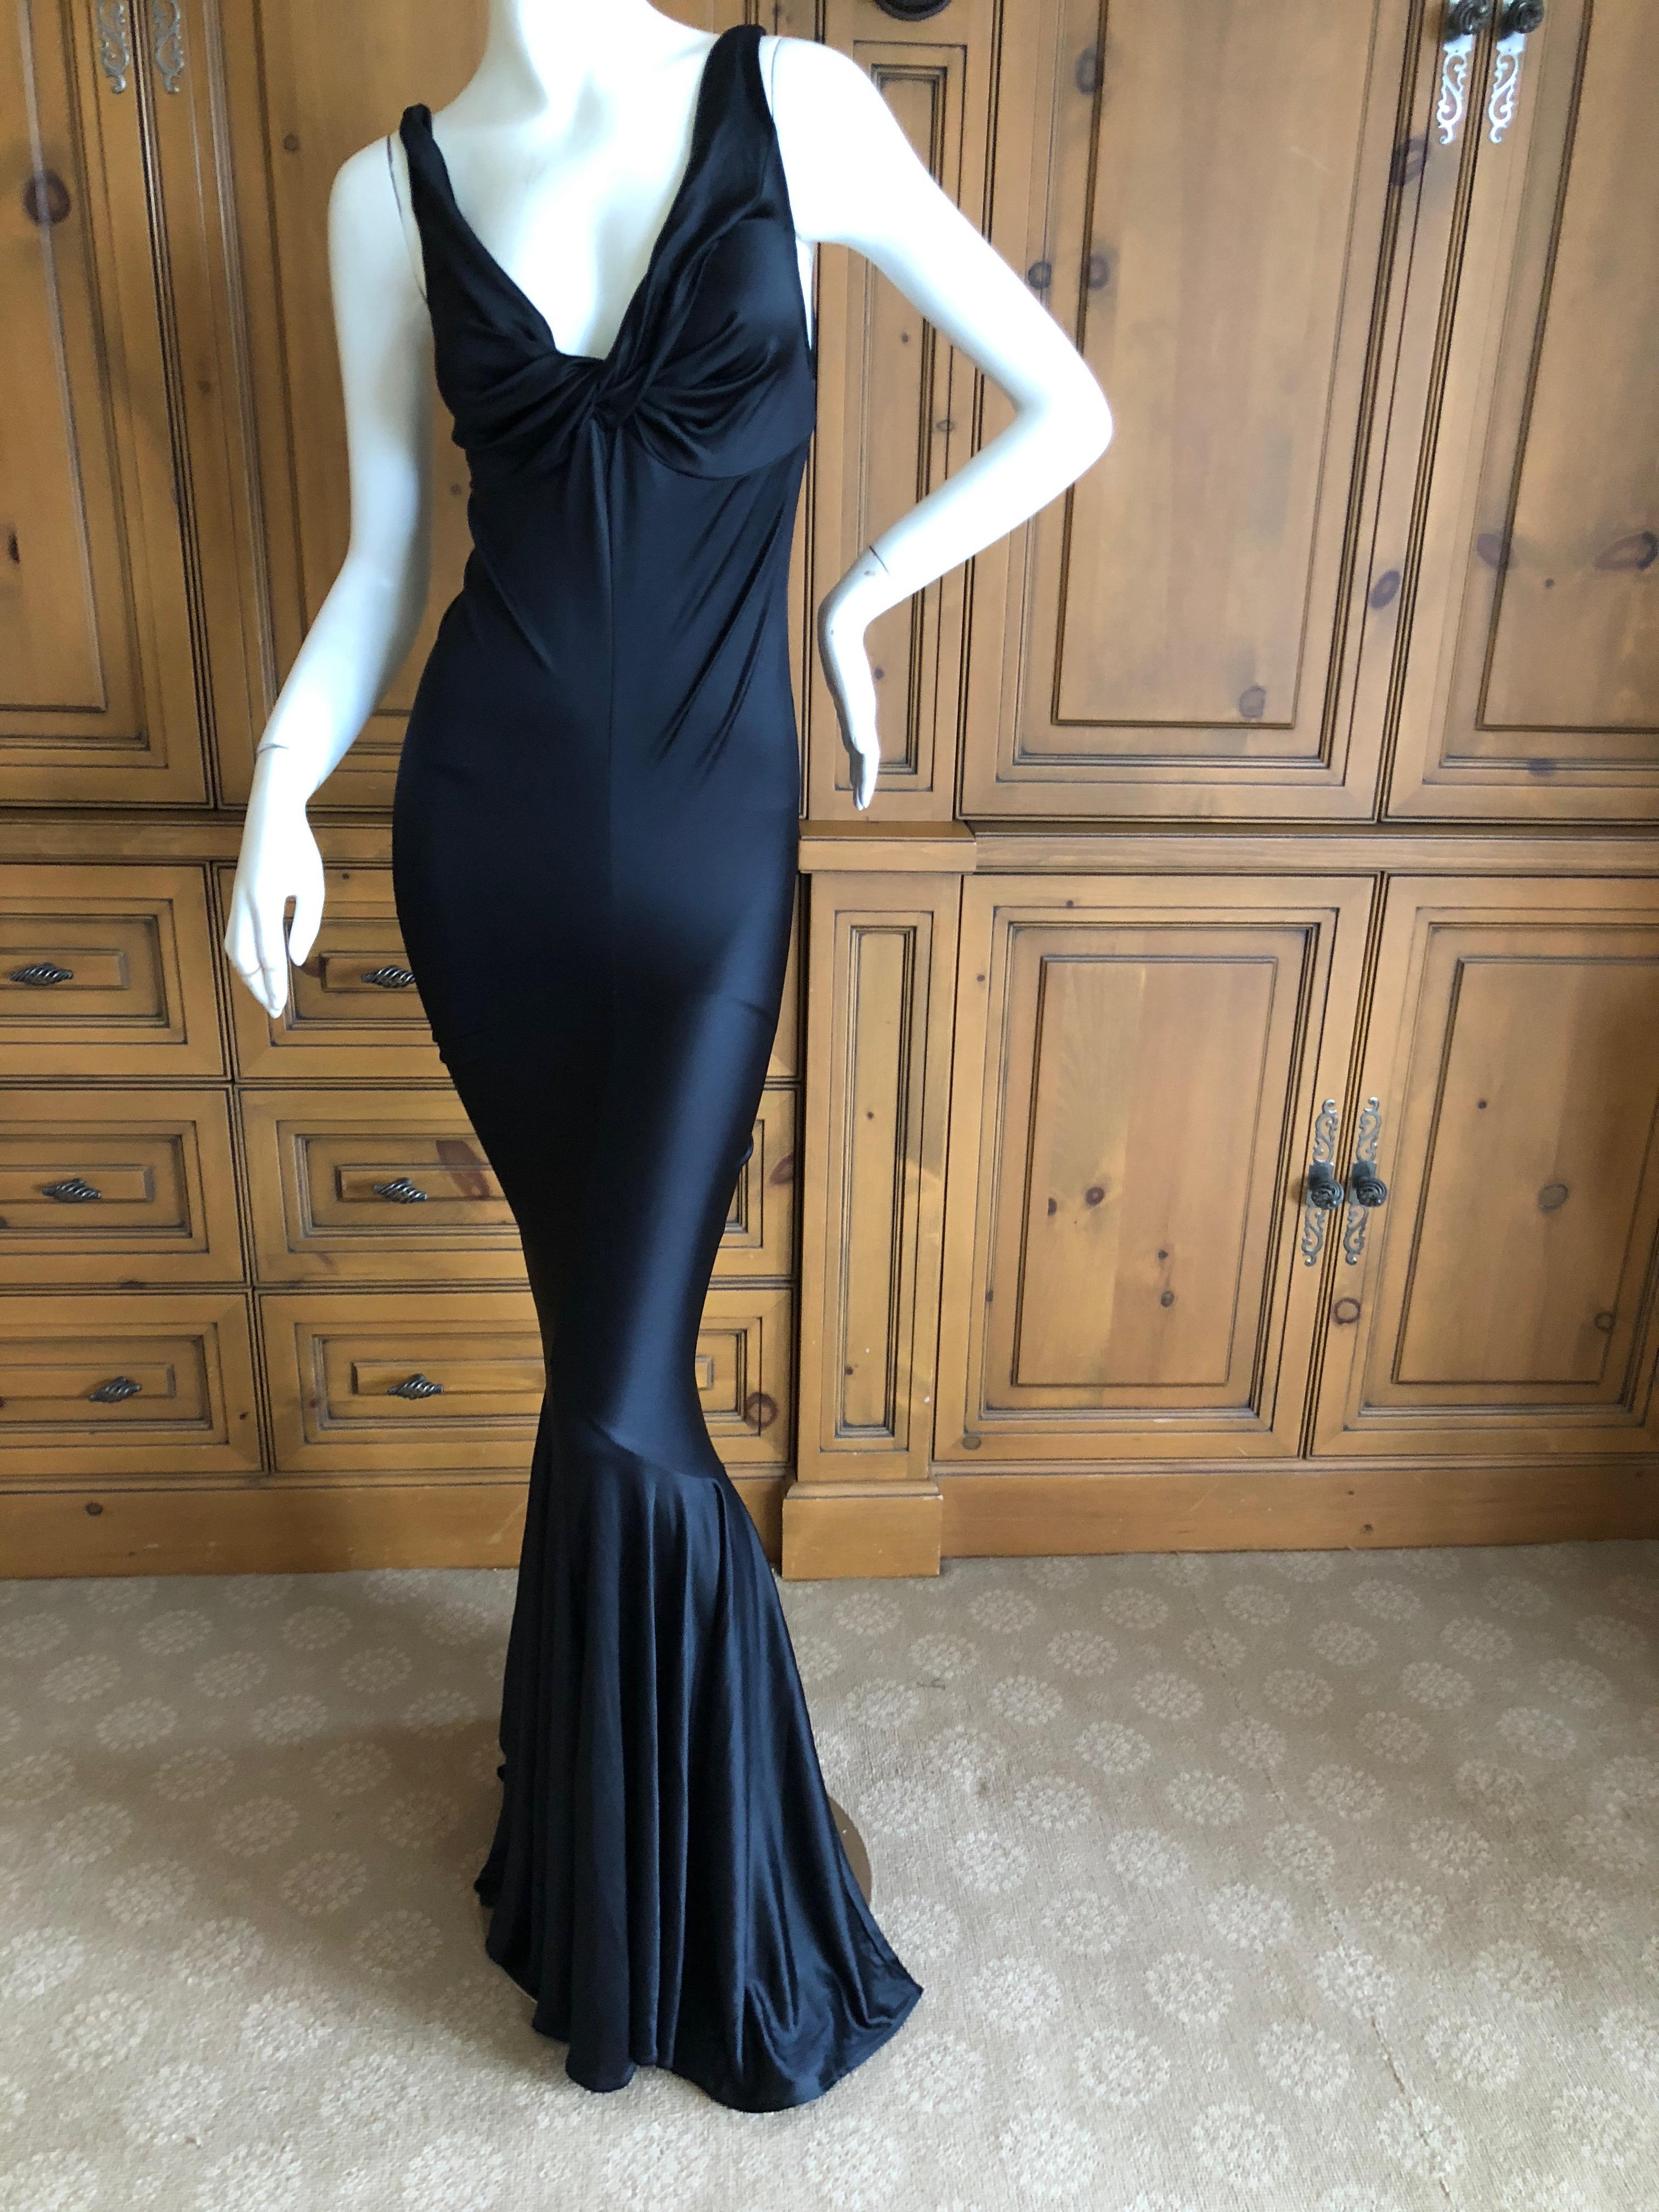 
Exquisite long black evening dress from early label John Galliano.
Size L
Bust 36